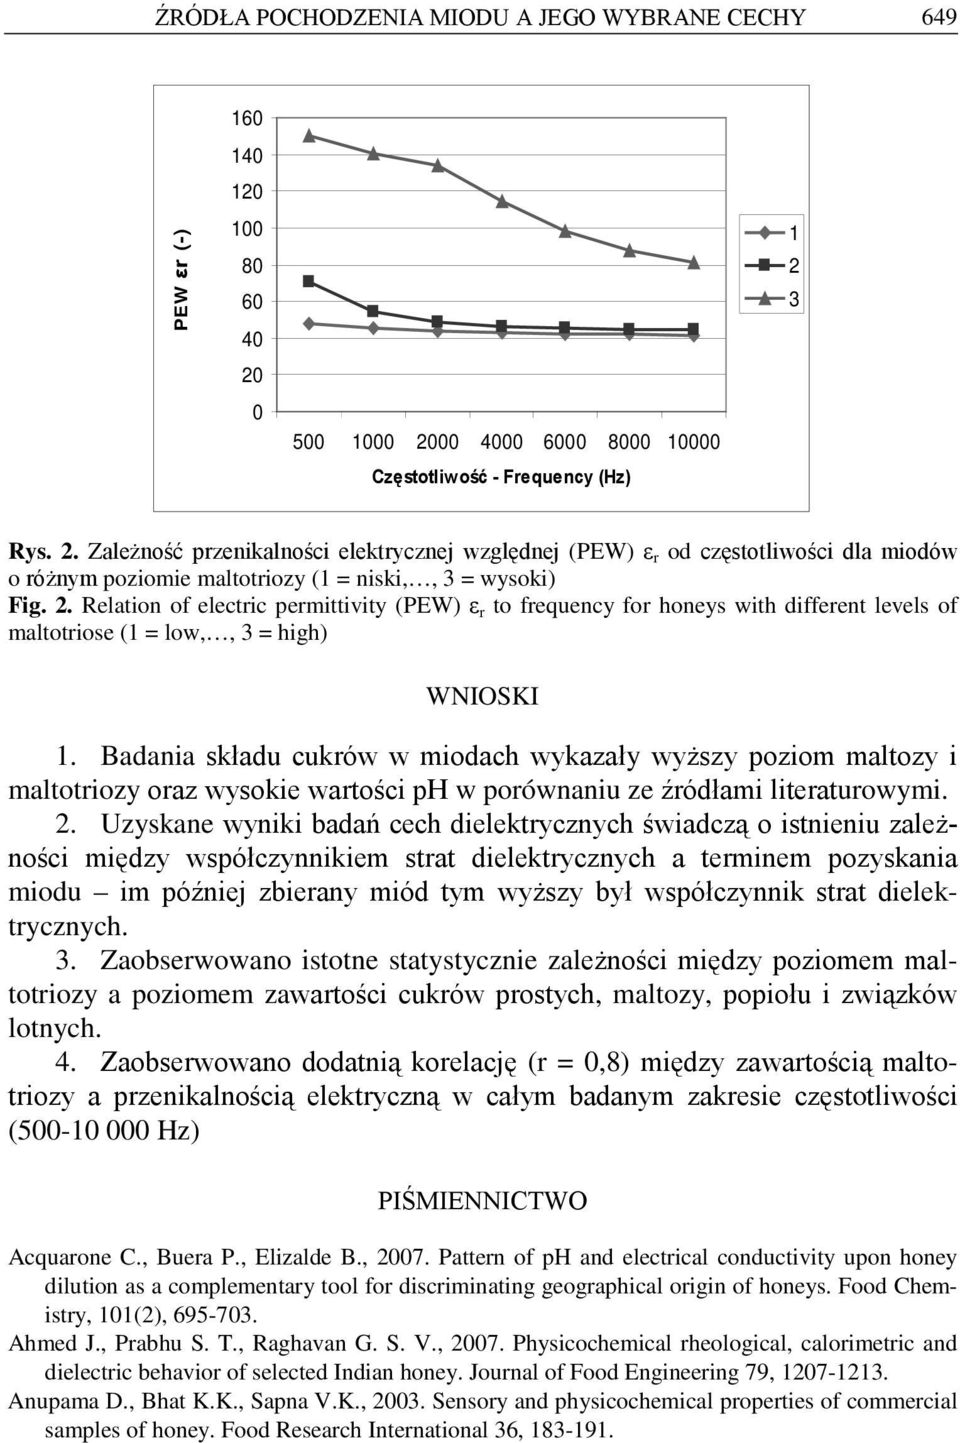 2. Relation of electric permittivity (PEW) ε r to frequency for honeys with different levels of maltotriose (1 = low,, 3 = high) WNIOSKI 1.